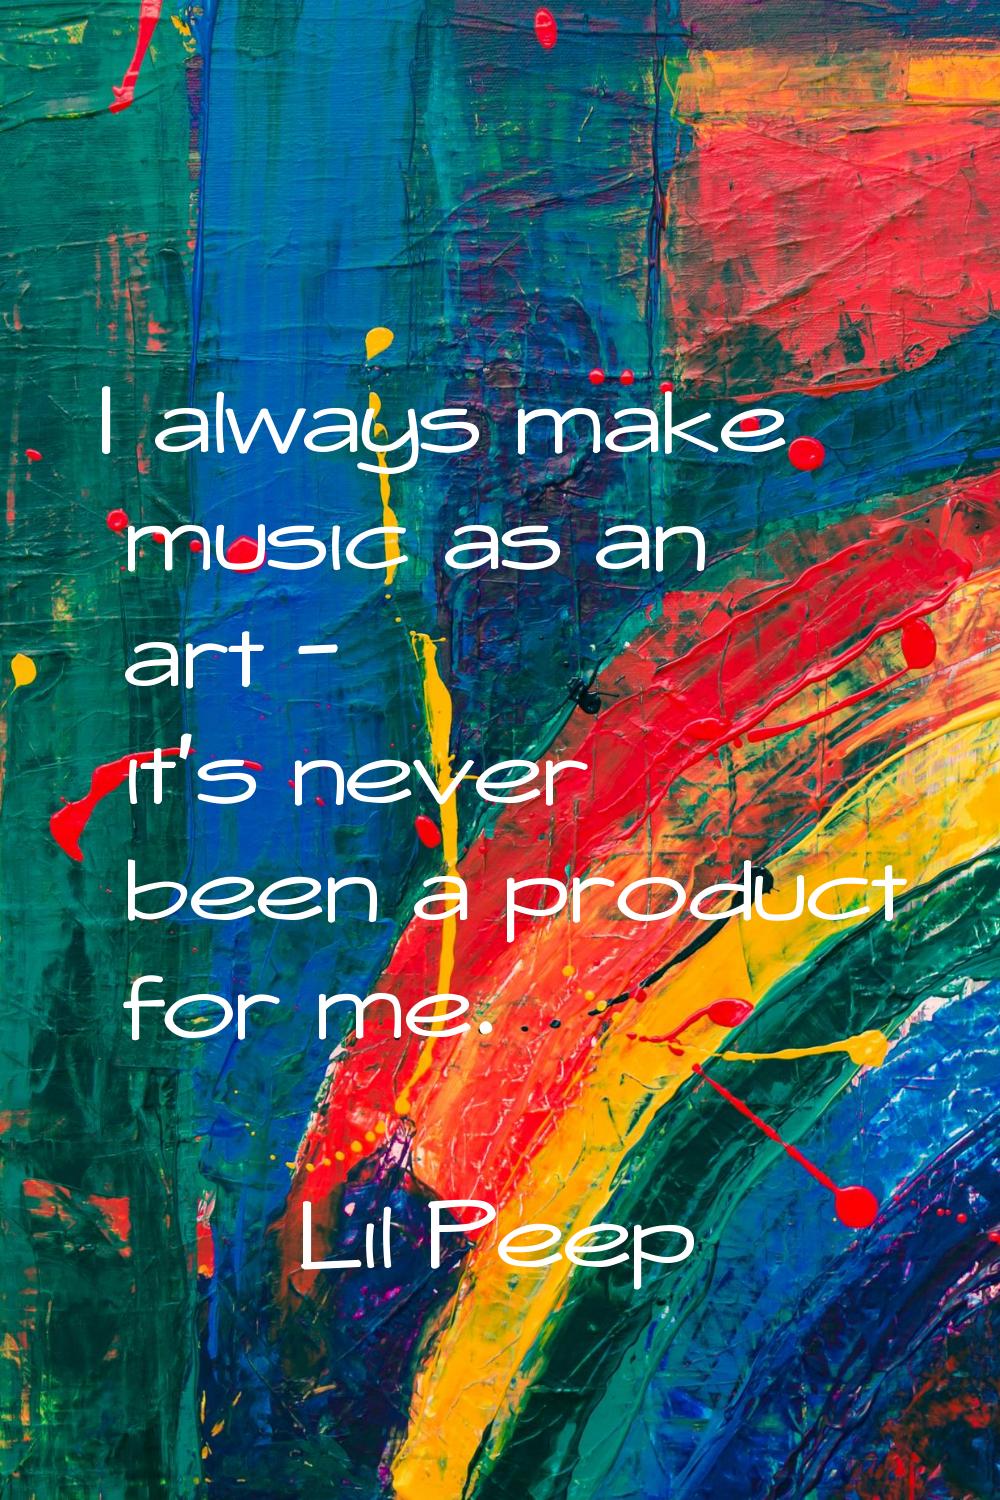 I always make music as an art - it's never been a product for me.